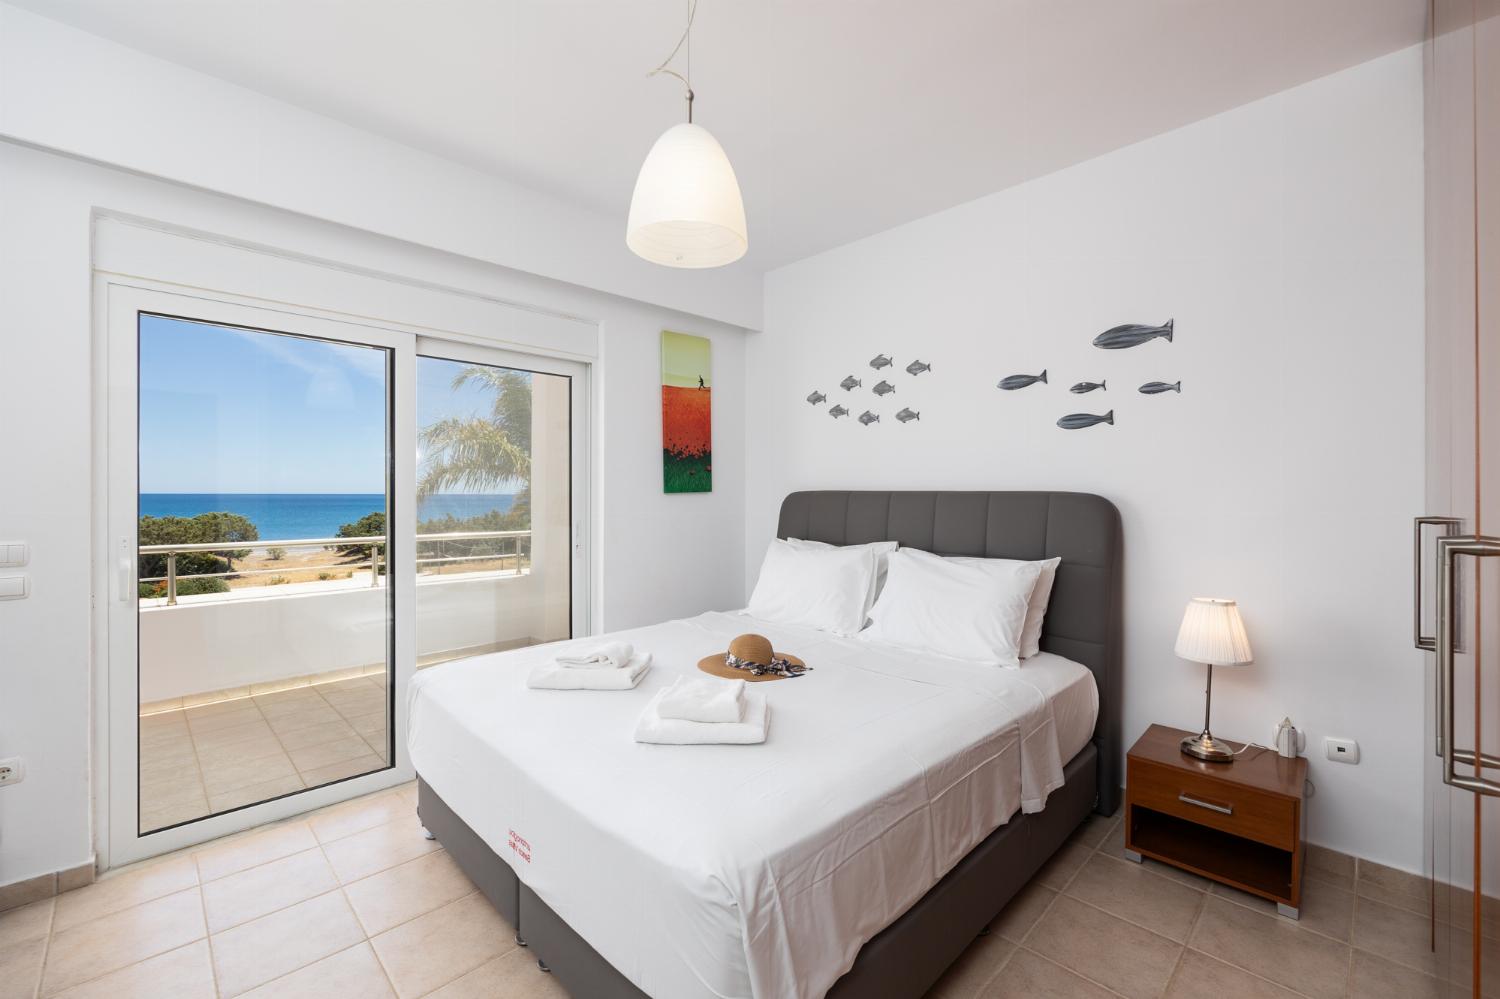 Main building: double bedroom with A/C, TV, and sea views